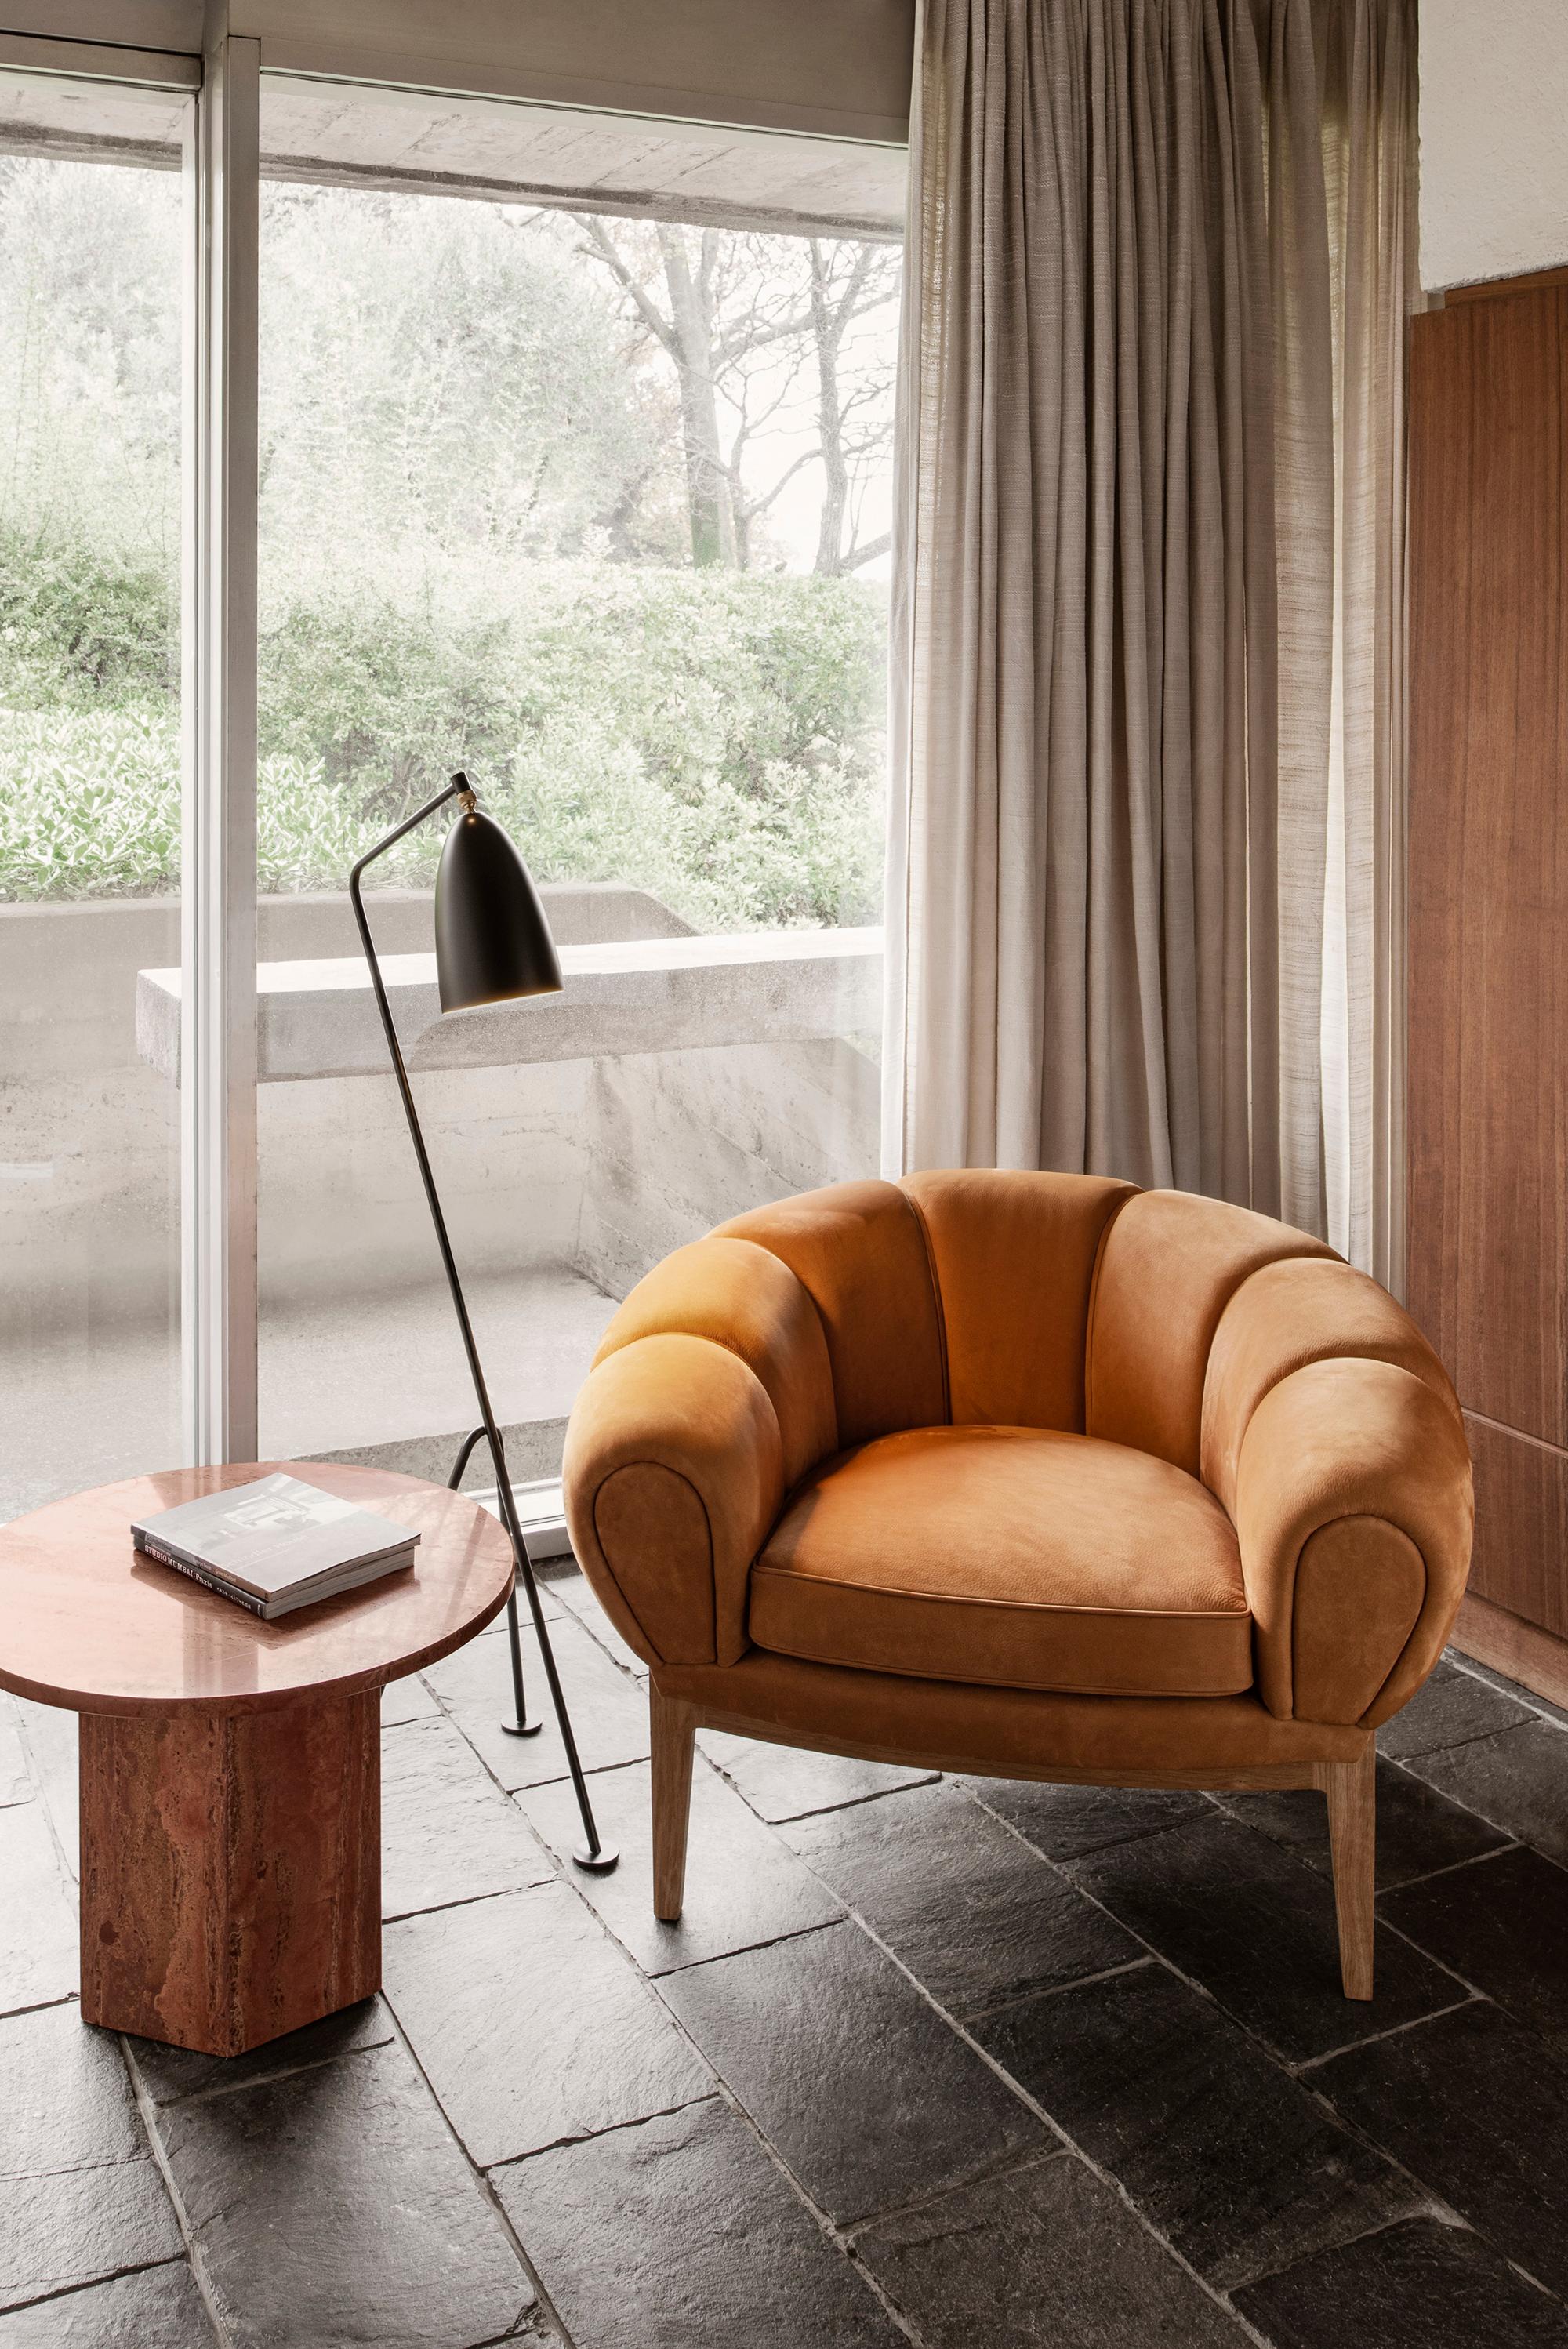 Leather 'Croissant' lounge chair by Illum Wikkelsø for GUBI.

Playful, voluptuous and expertly crafted, the newly reimagined Croissant Collection from GUBI makes a powerful statement in any interior setting and an heirloom to treasure for